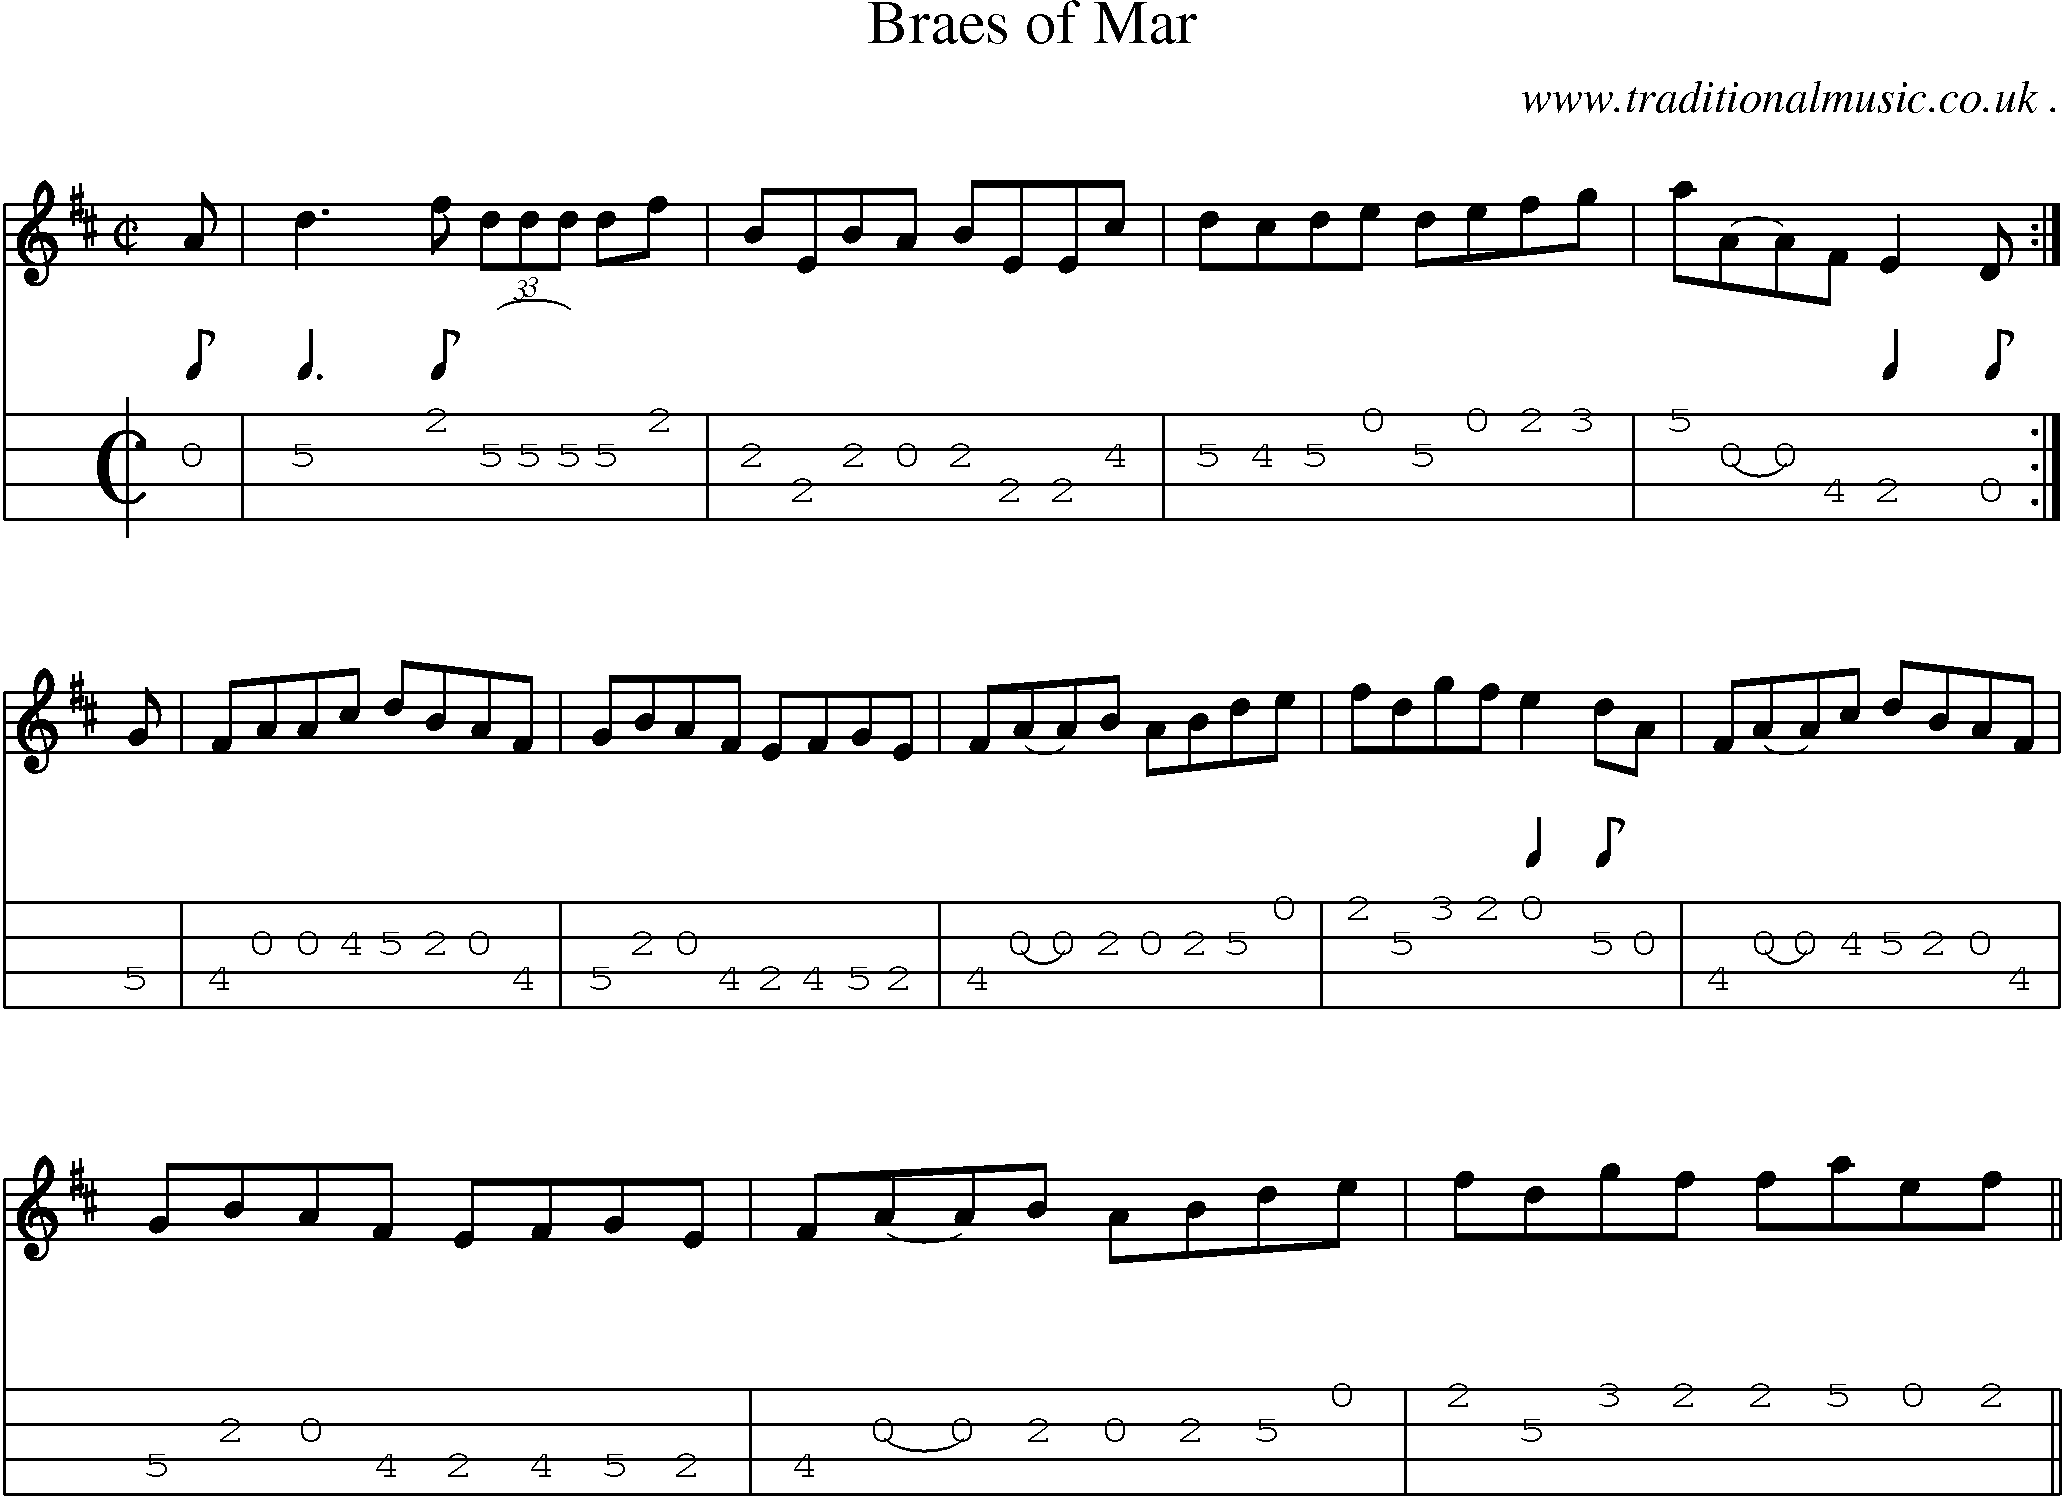 Sheet-music  score, Chords and Mandolin Tabs for Braes Of Mar